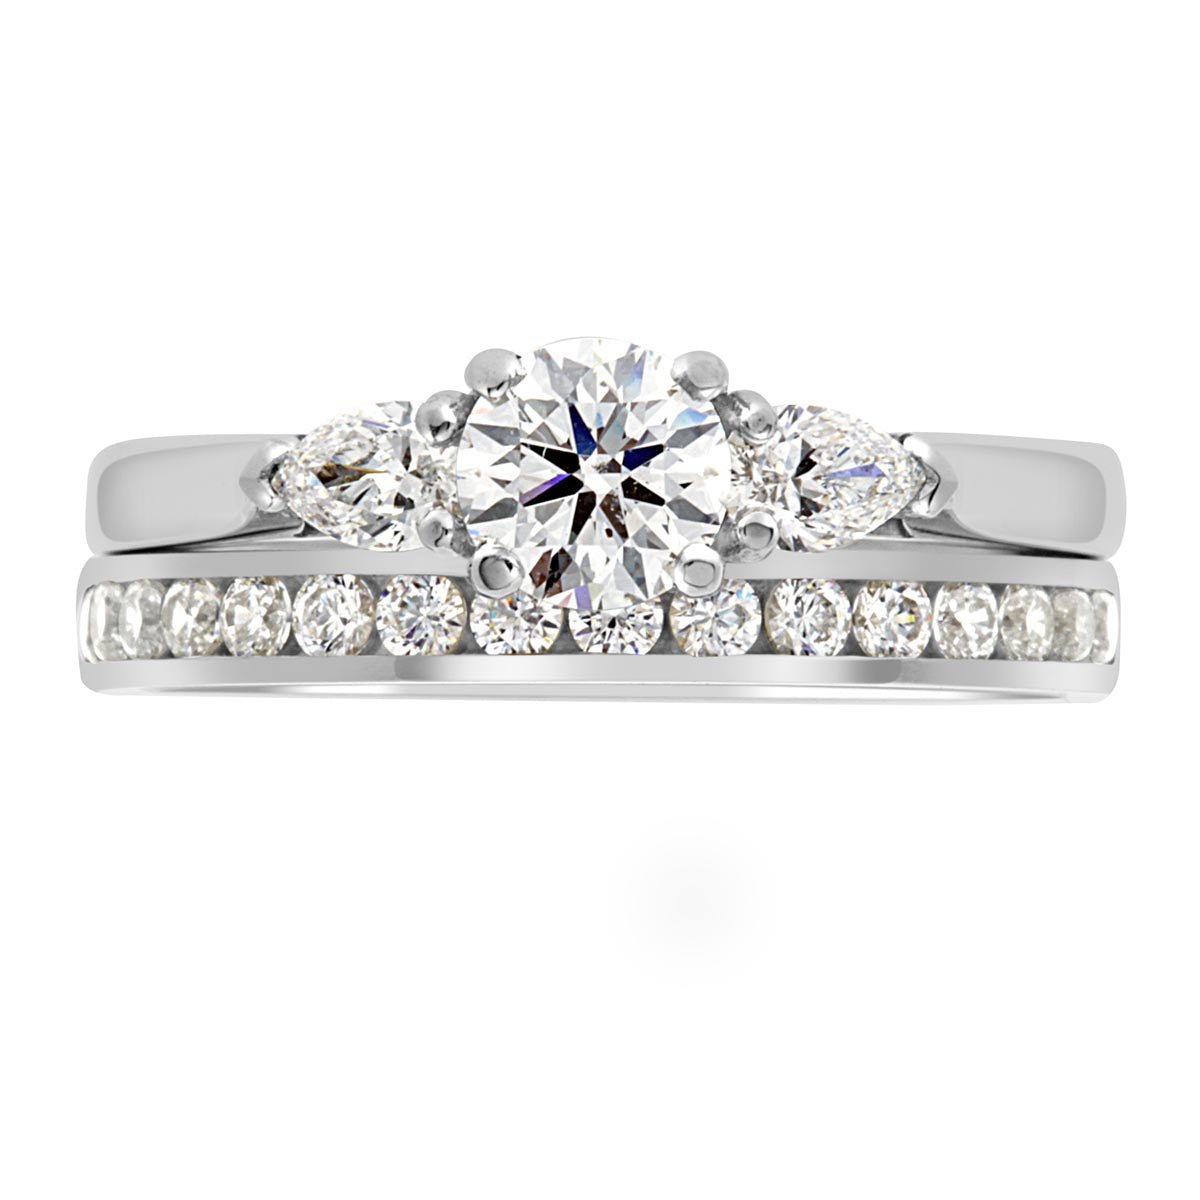 Round and Pear Diamond Ring in white gold with diamond wedding ring